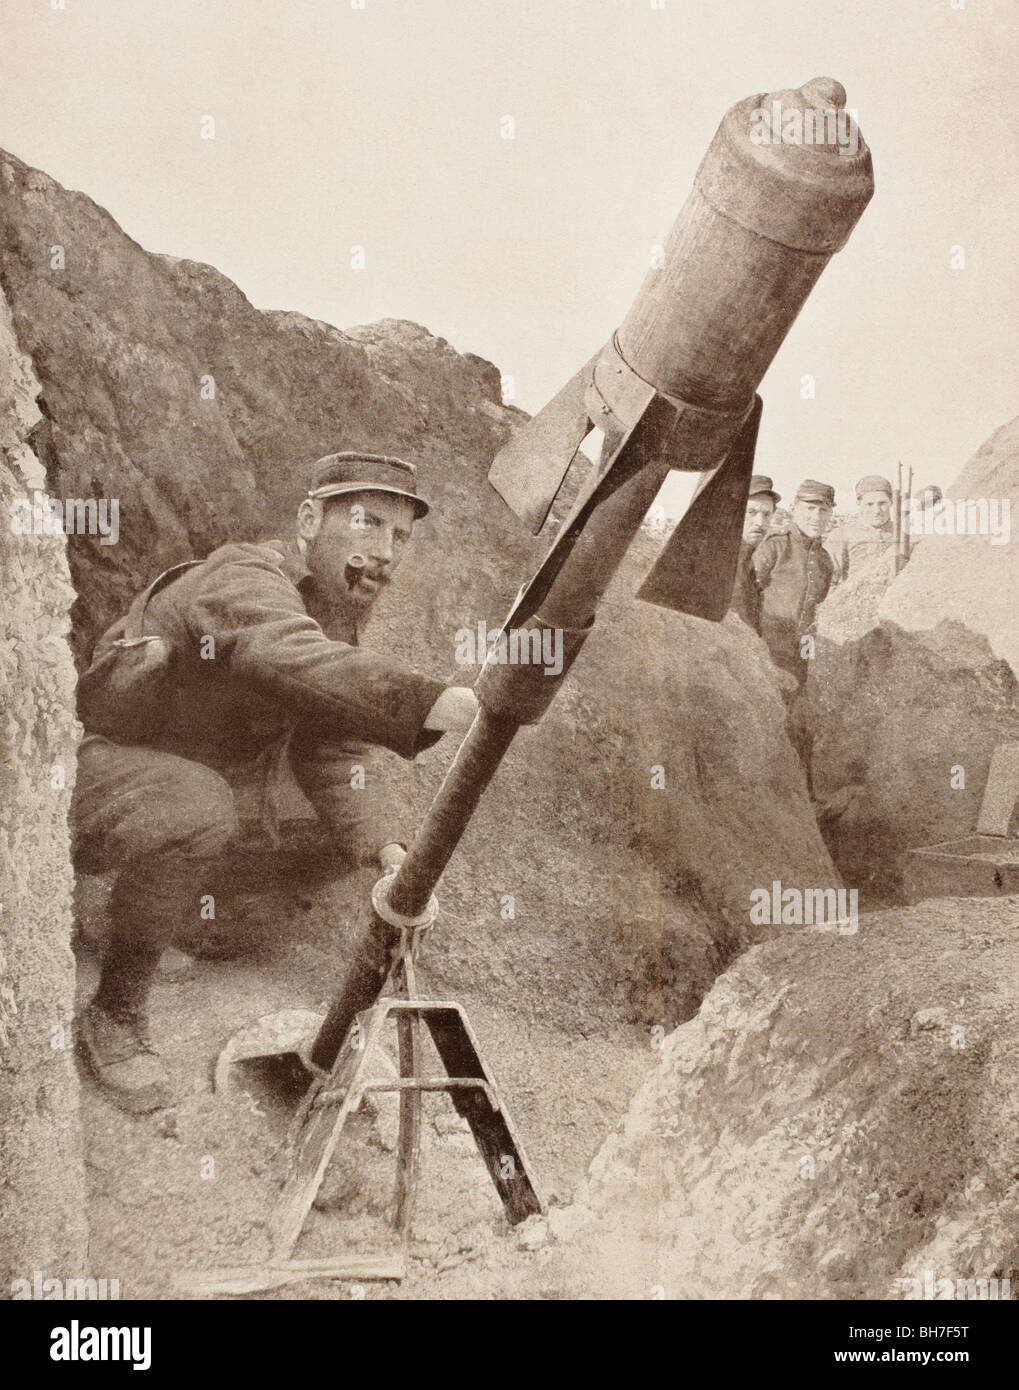 Rocket launcher known as l'obus-torpille or shell-torpedo, a weapon used during the First World War. Stock Photo